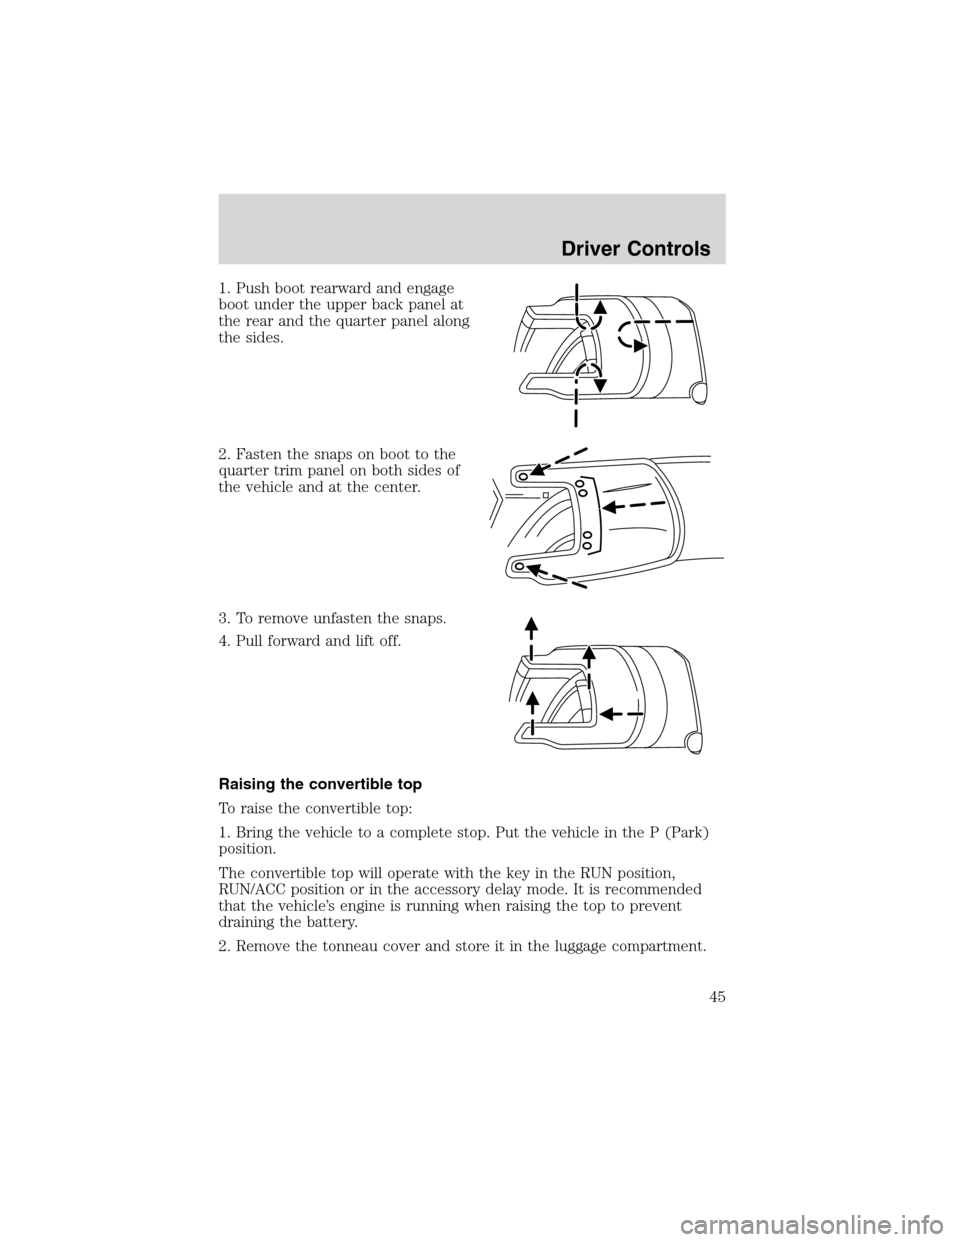 FORD THUNDERBIRD 2003 11.G Service Manual 1. Push boot rearward and engage
boot under the upper back panel at
the rear and the quarter panel along
the sides.
2. Fasten the snaps on boot to the
quarter trim panel on both sides of
the vehicle a